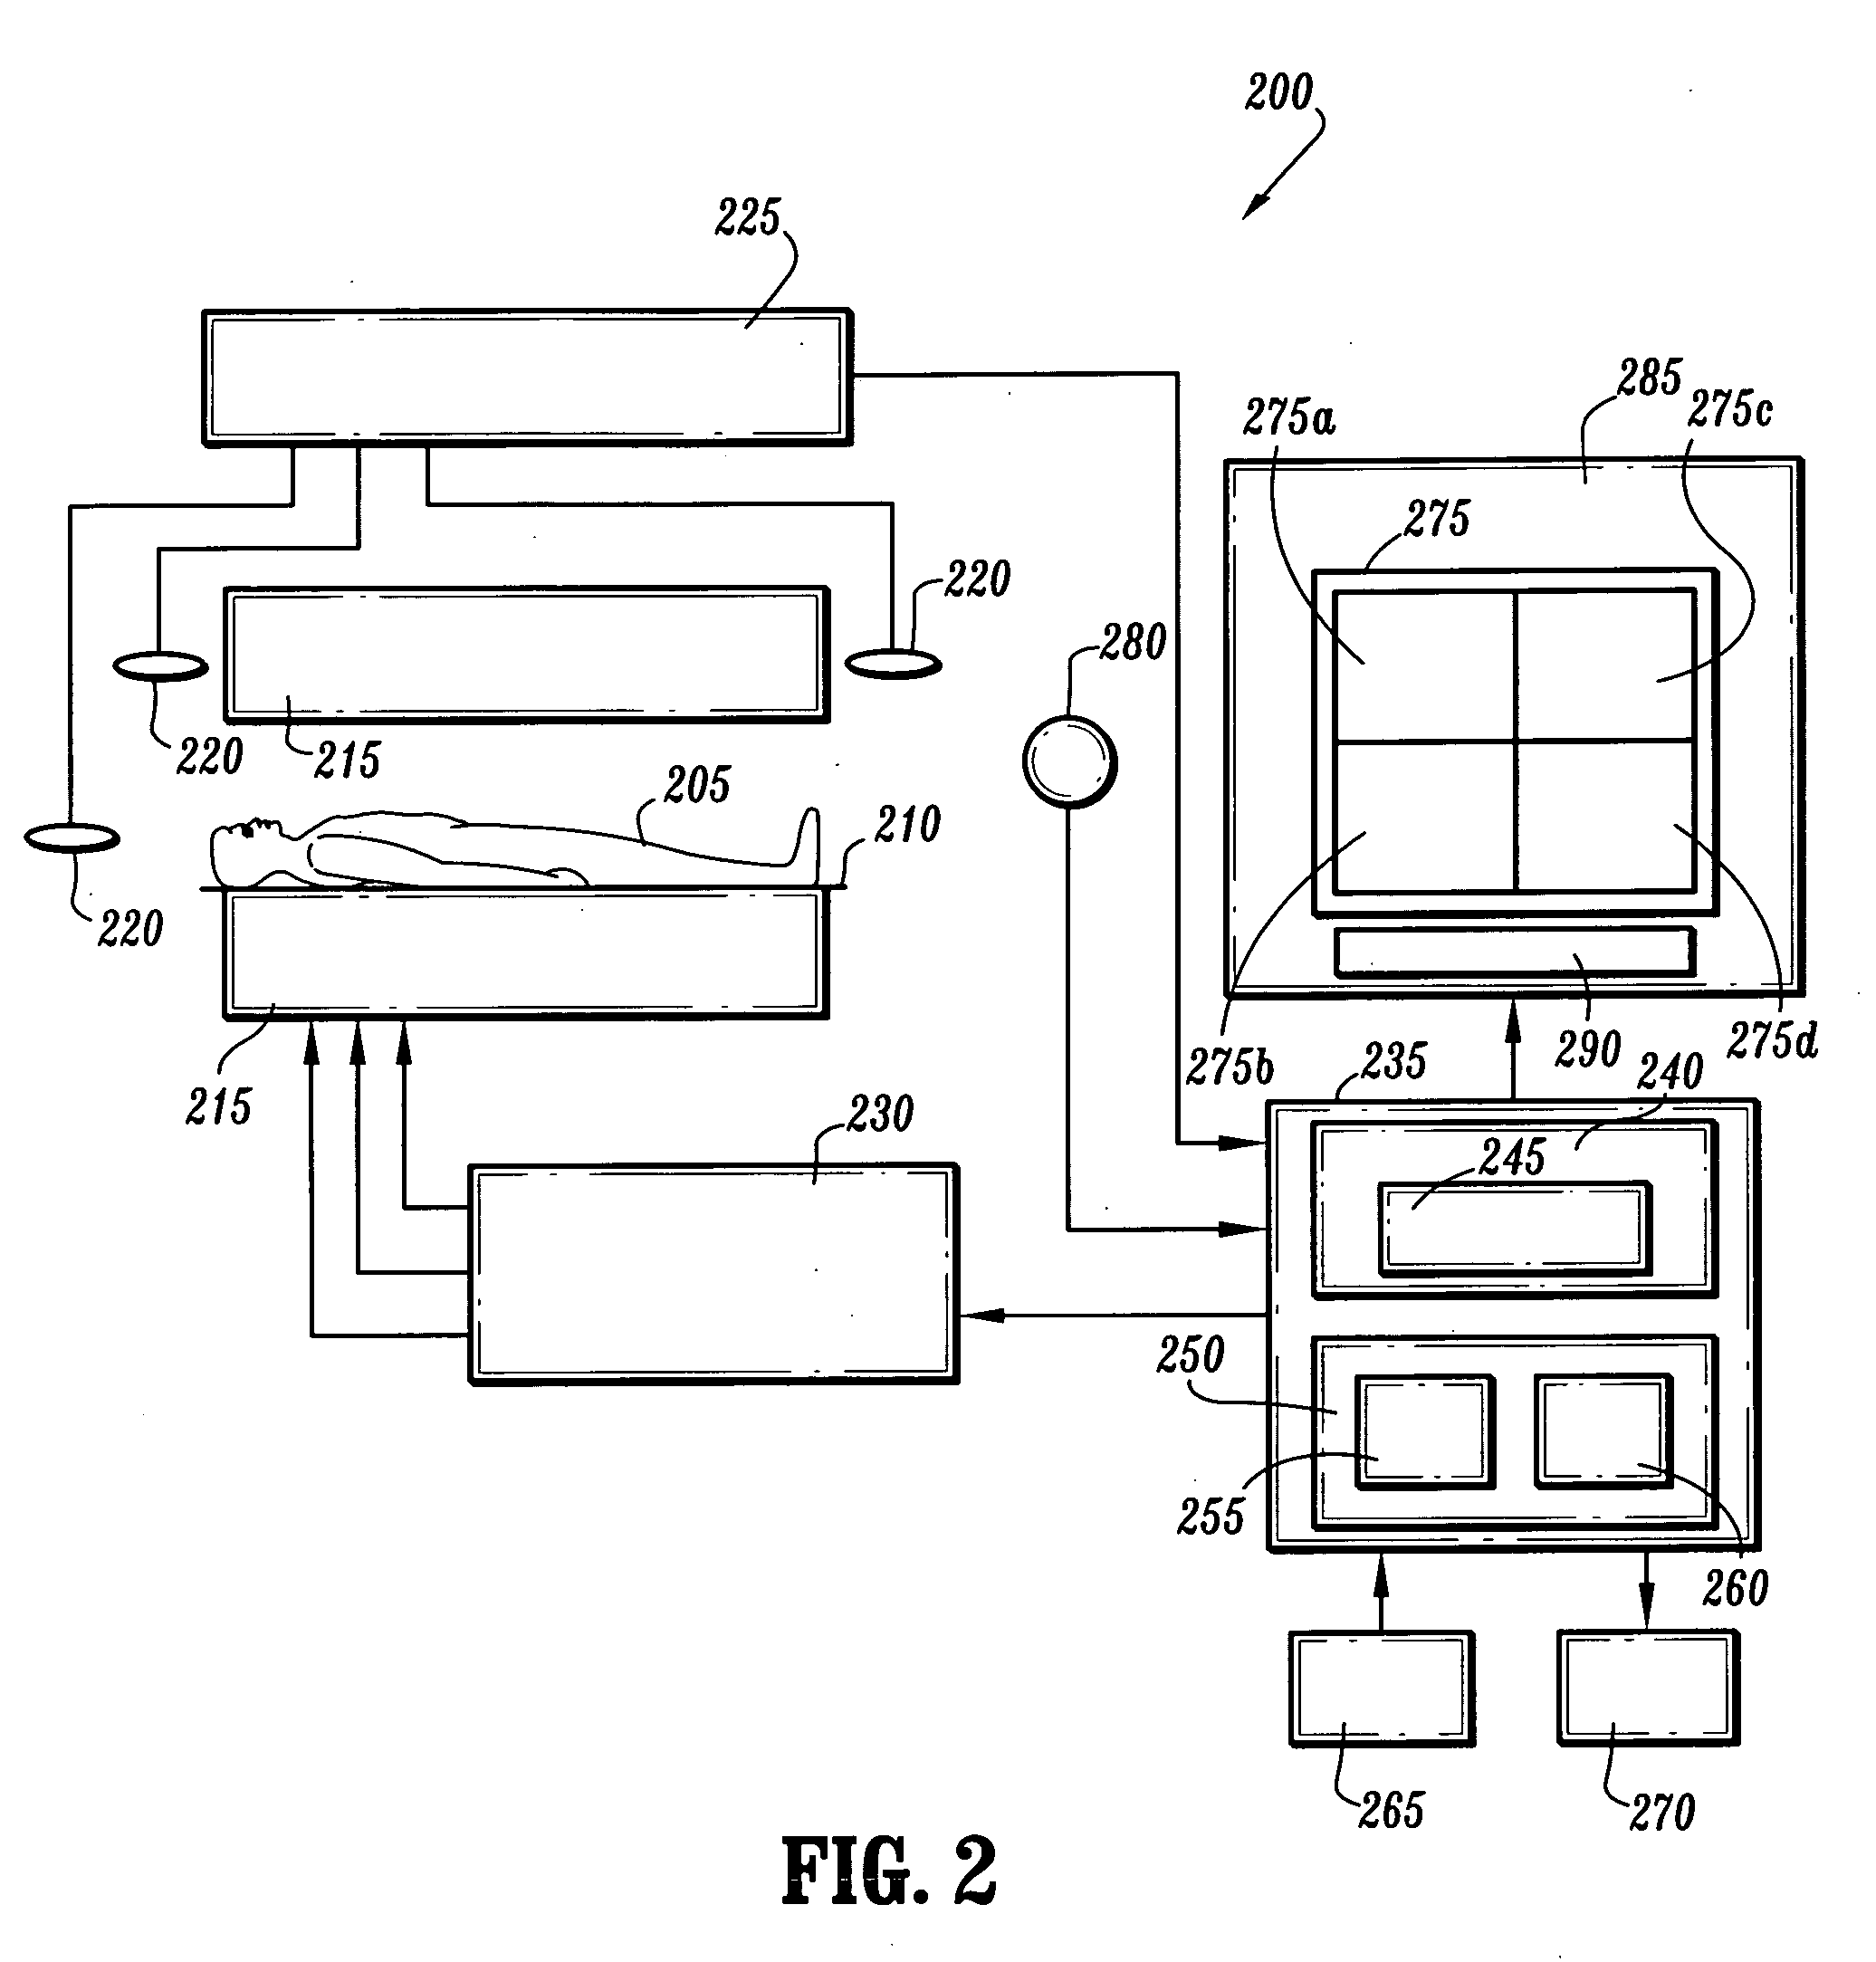 System and method for endoscopic optical constrast imaging using an endo-robot